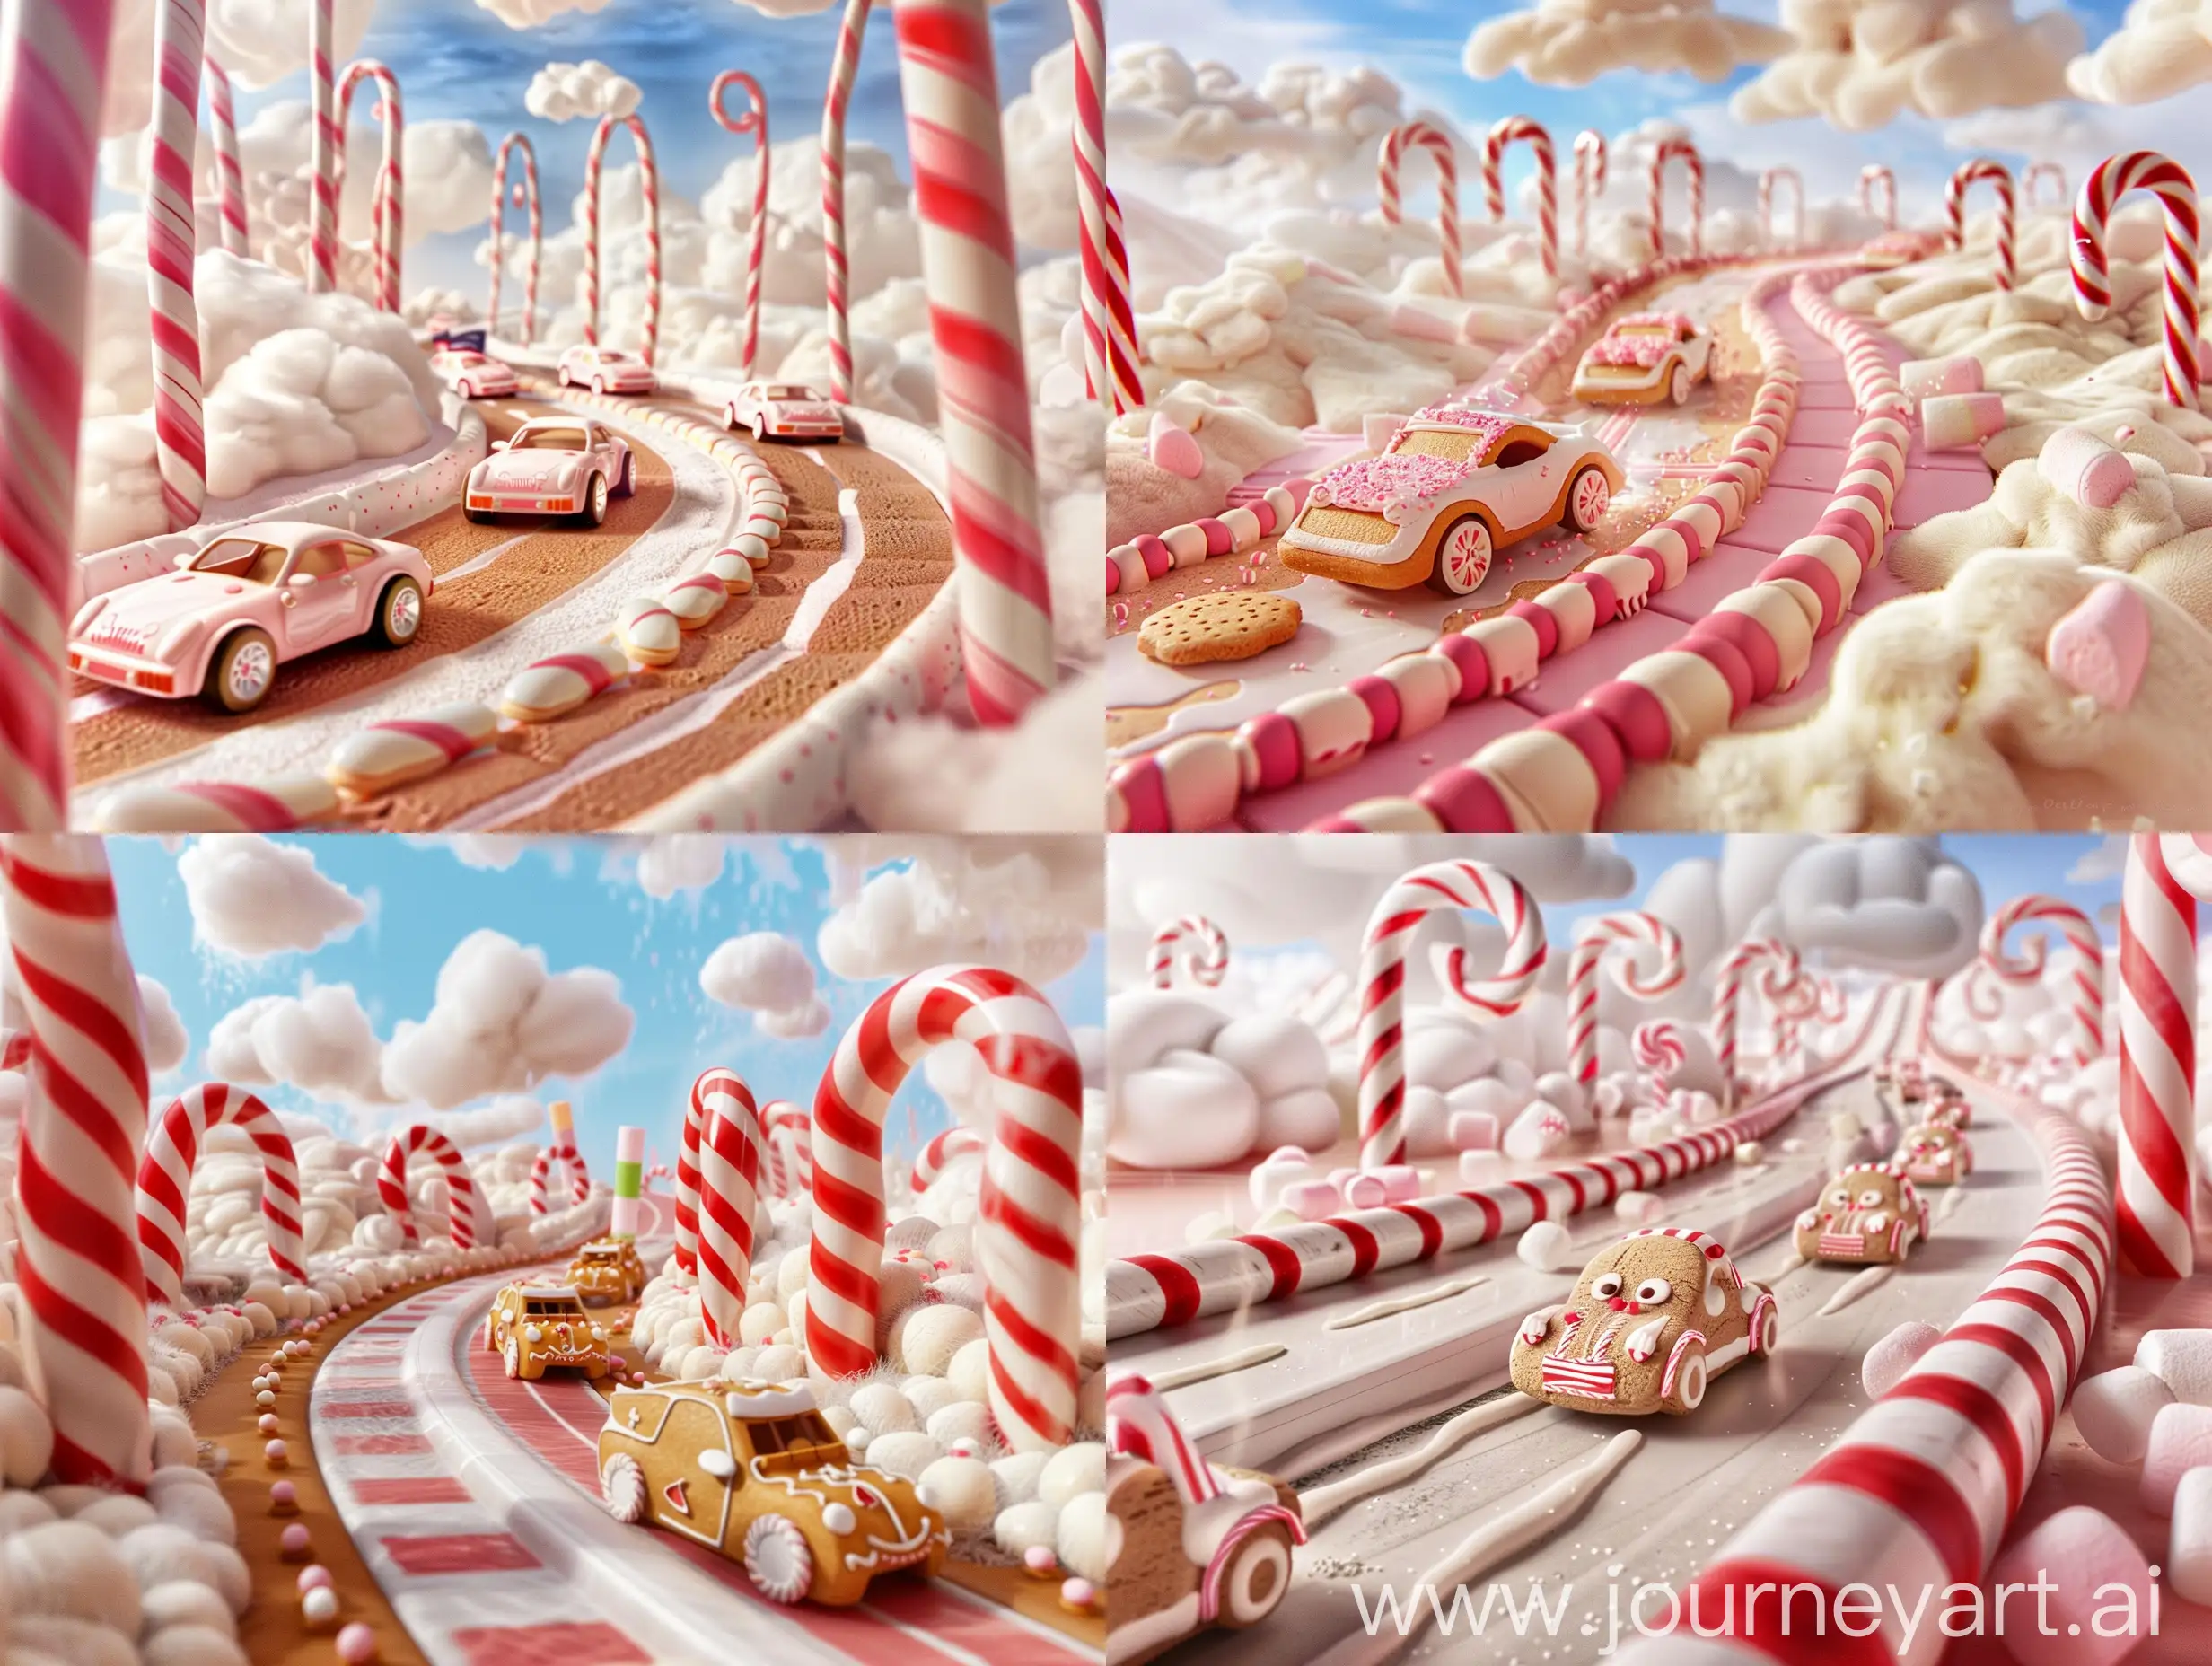 Visualize a whimsical scene where car-shaped cookies come to life, racing along a sugary track lined with candy canes and marshmallow clouds. Describe this sweet racing world and request DALL-E to generate an image capturing its deliciously imaginative charm.